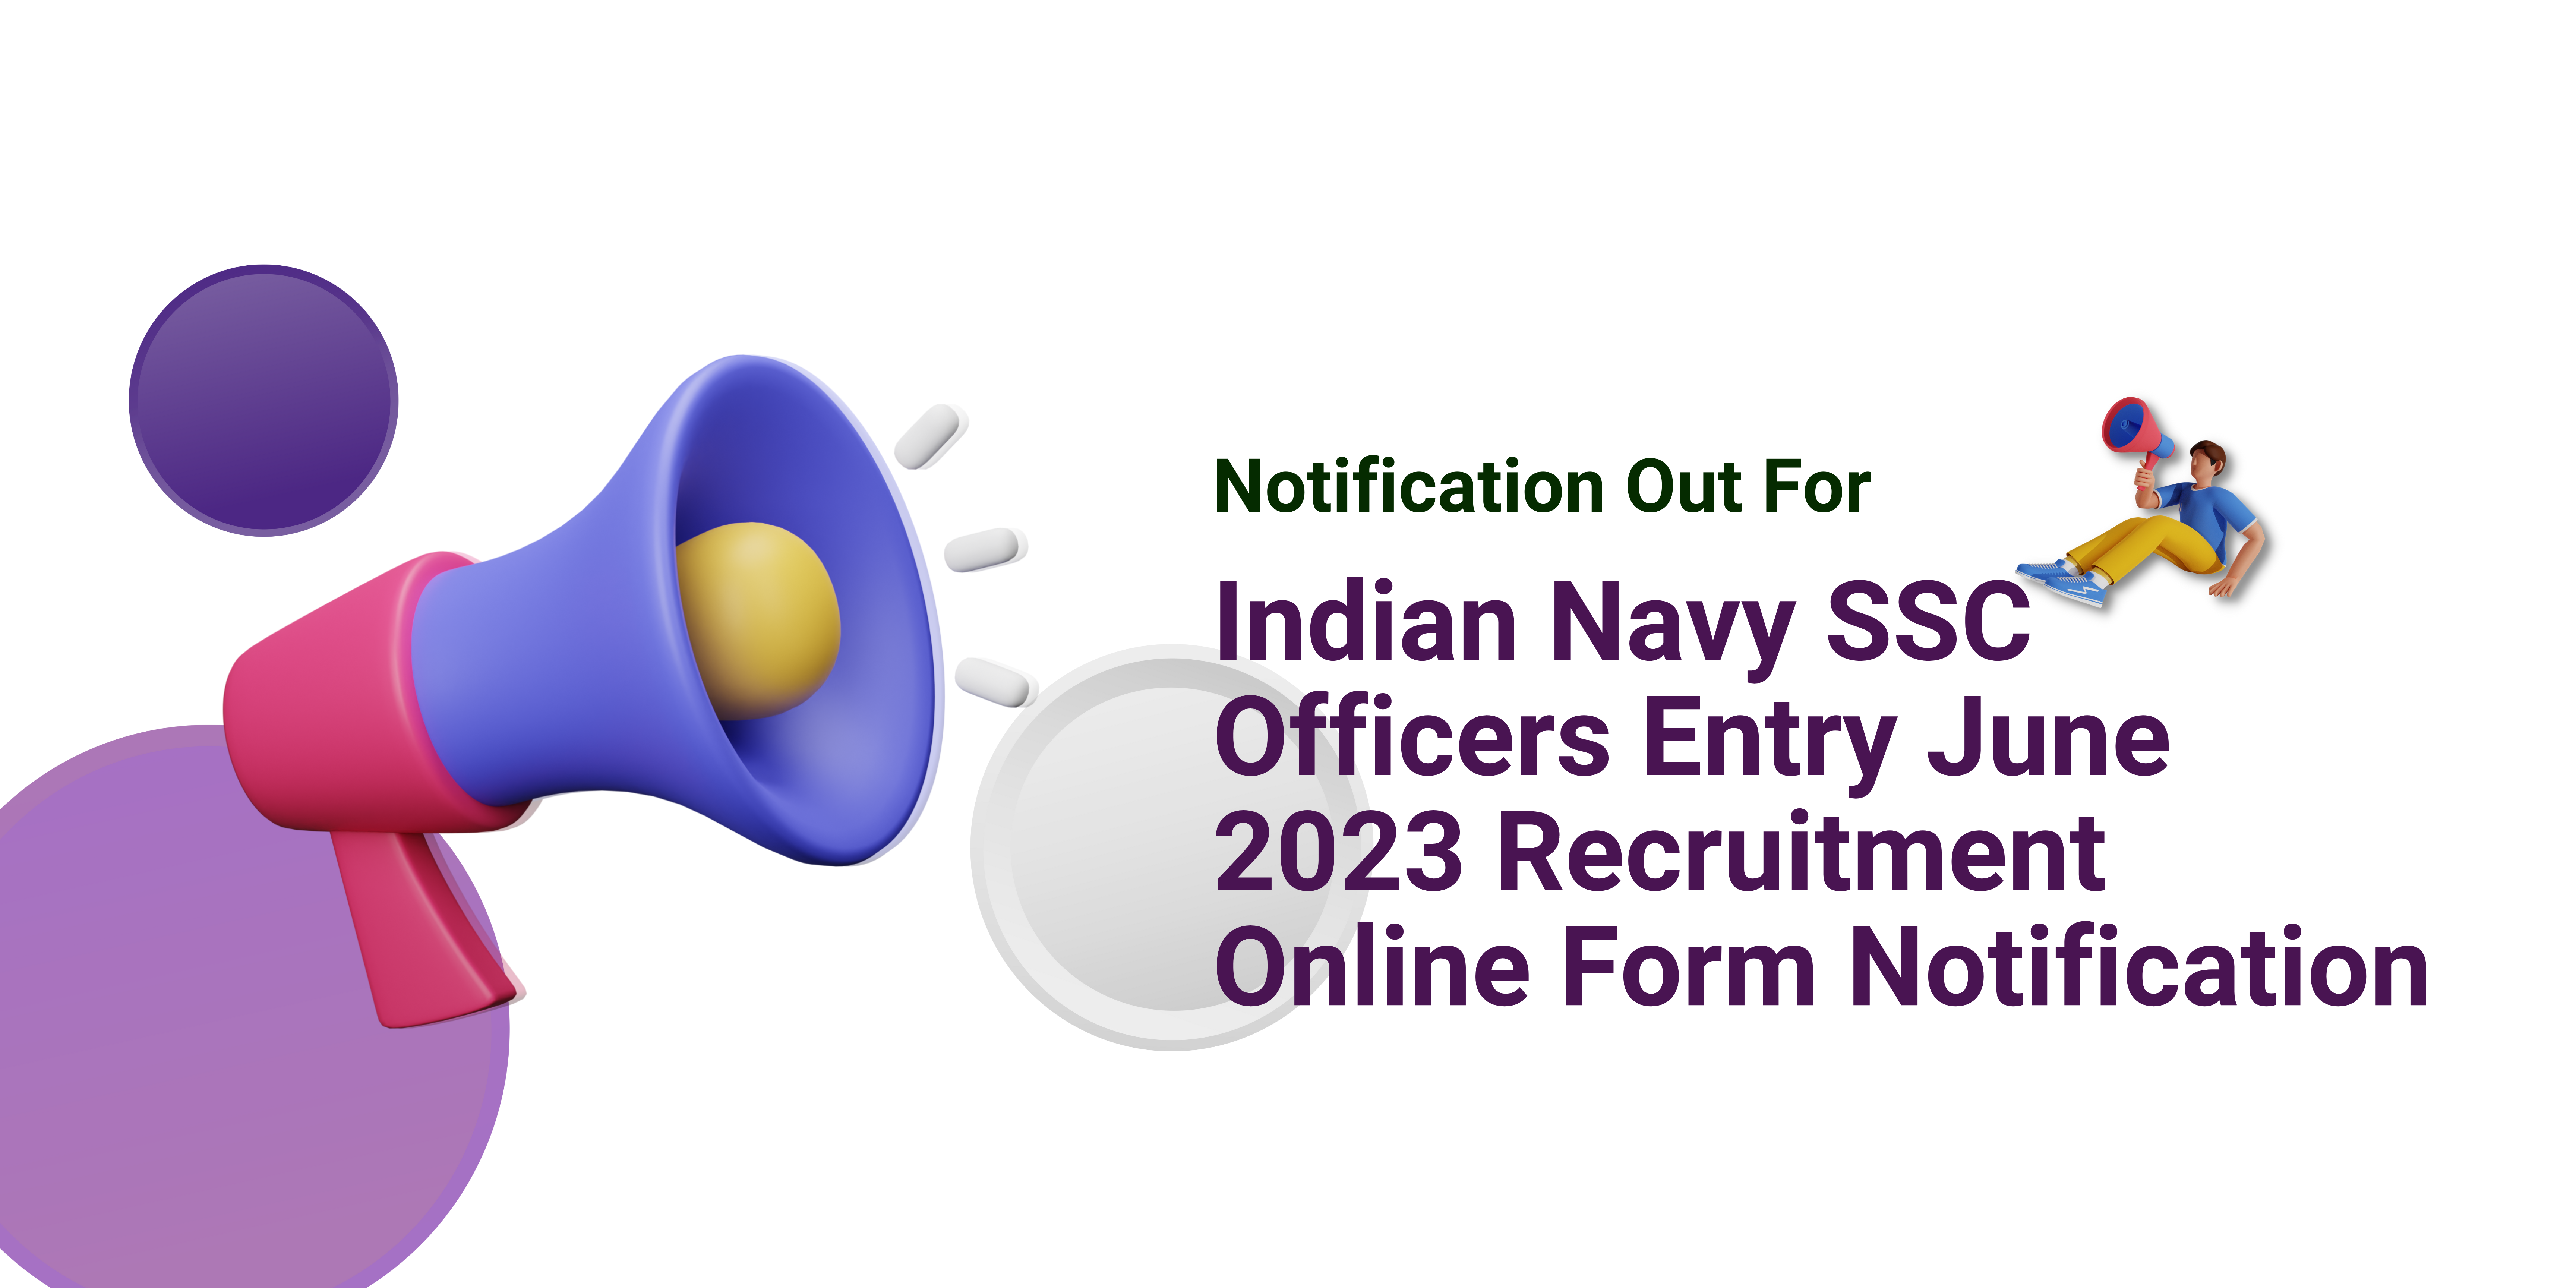 Indian Navy SSC Officers Entry June 2023 Recruitment Online Form